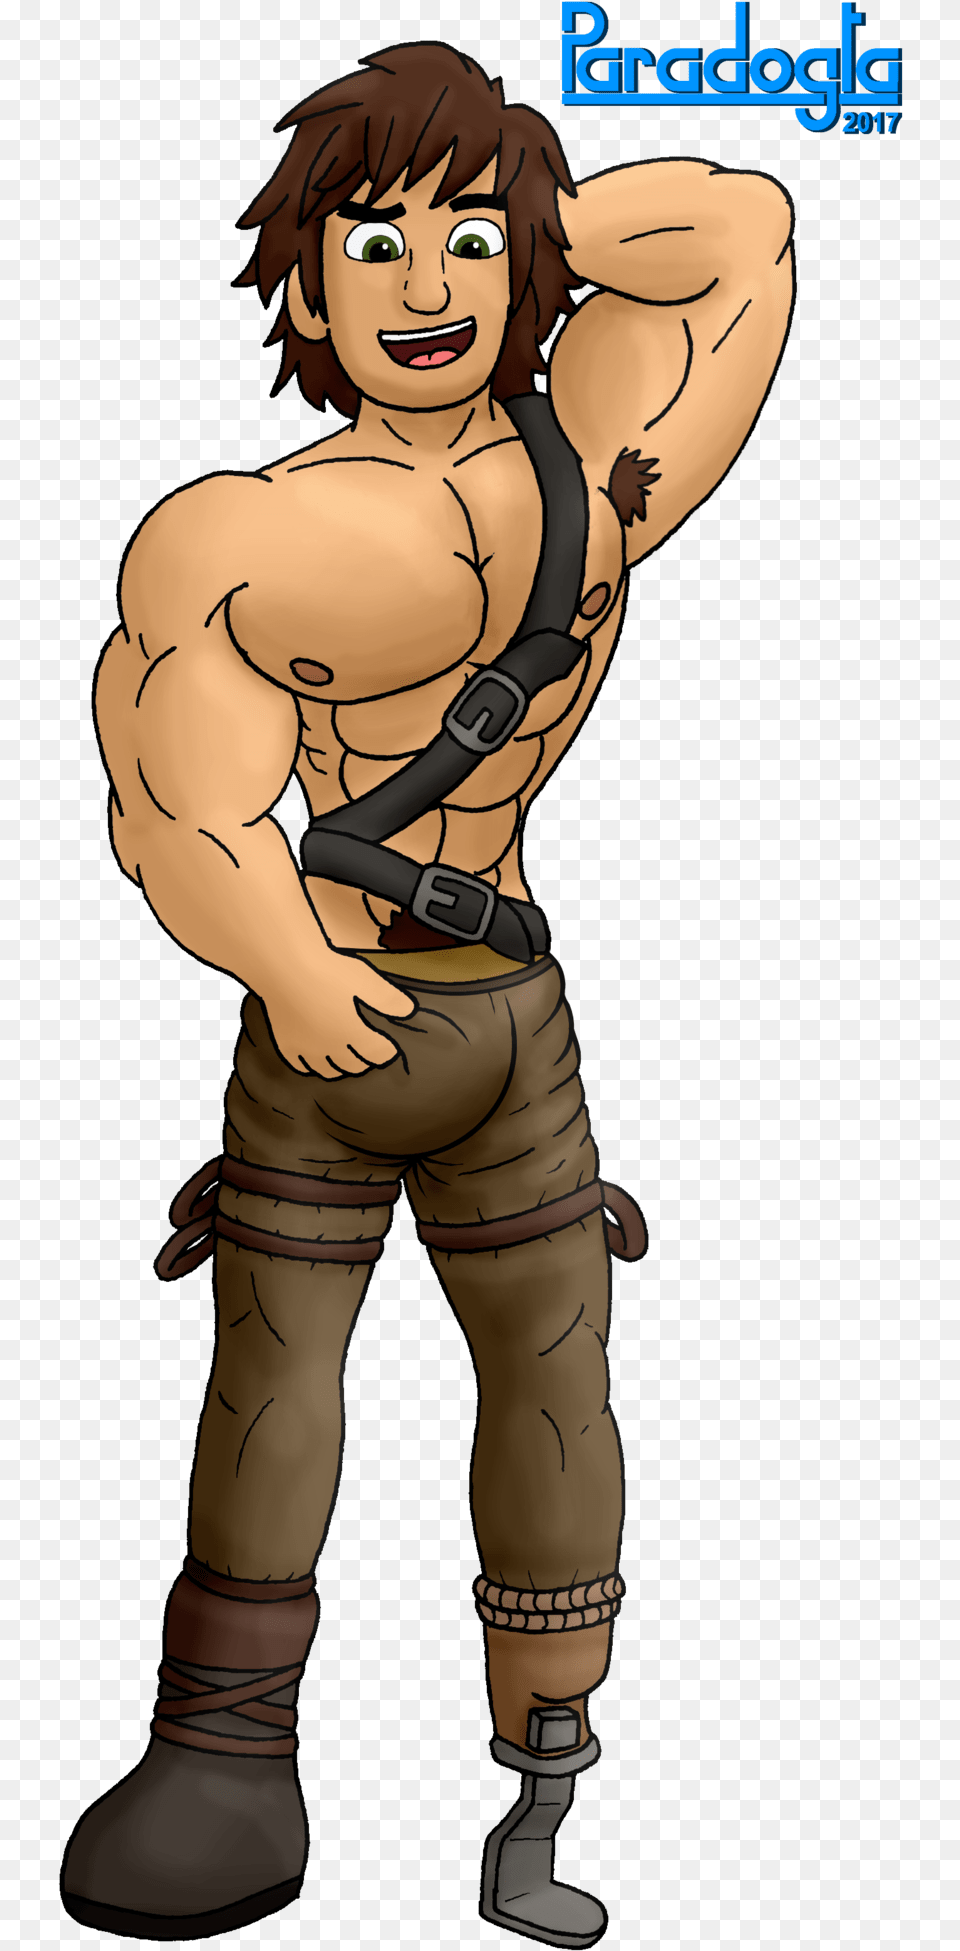 Download Older Muscle Hiccup By Paradogta Dbmwir7 Train Hiccup How To Train Your Dragon Hot, Book, Comics, Publication, Adult Png